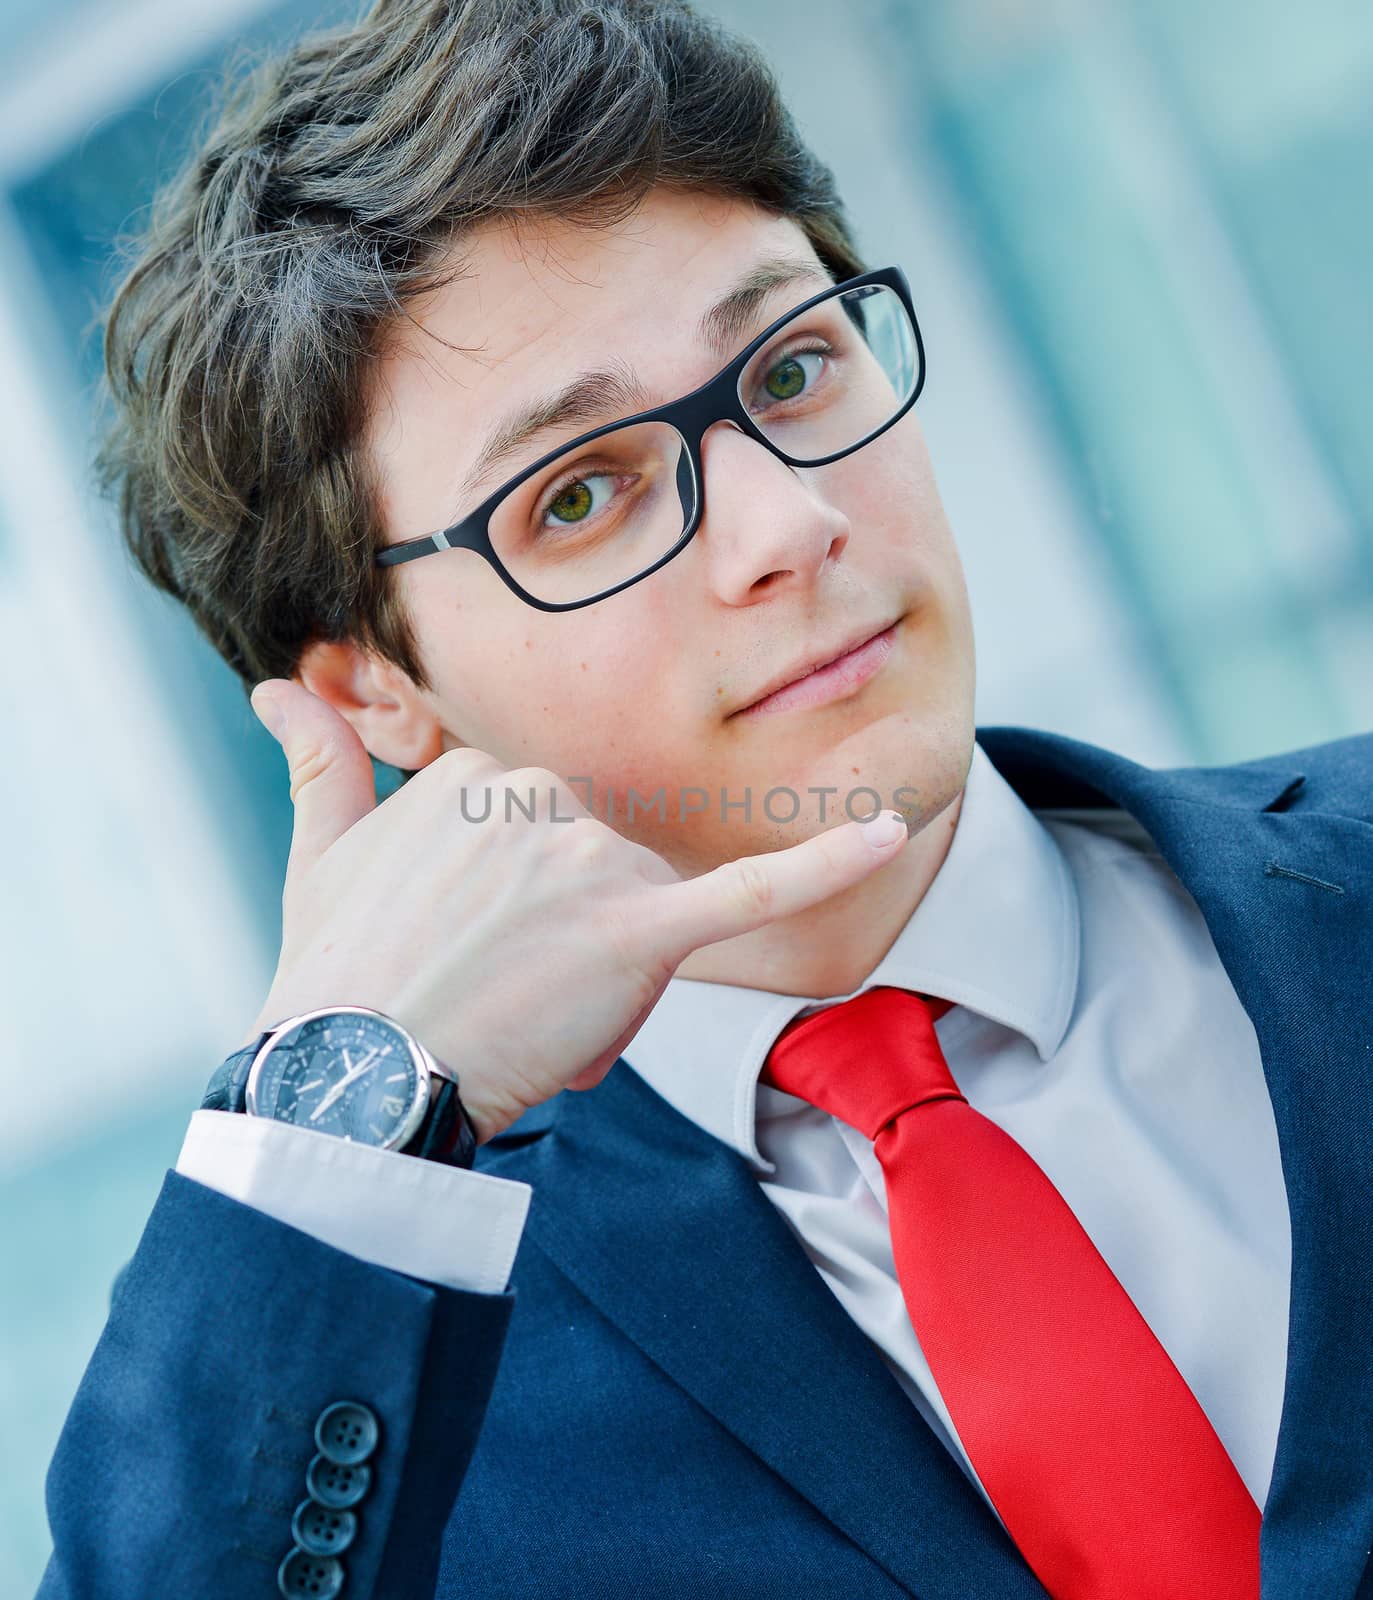 Dynamic junior executive gesturing to call